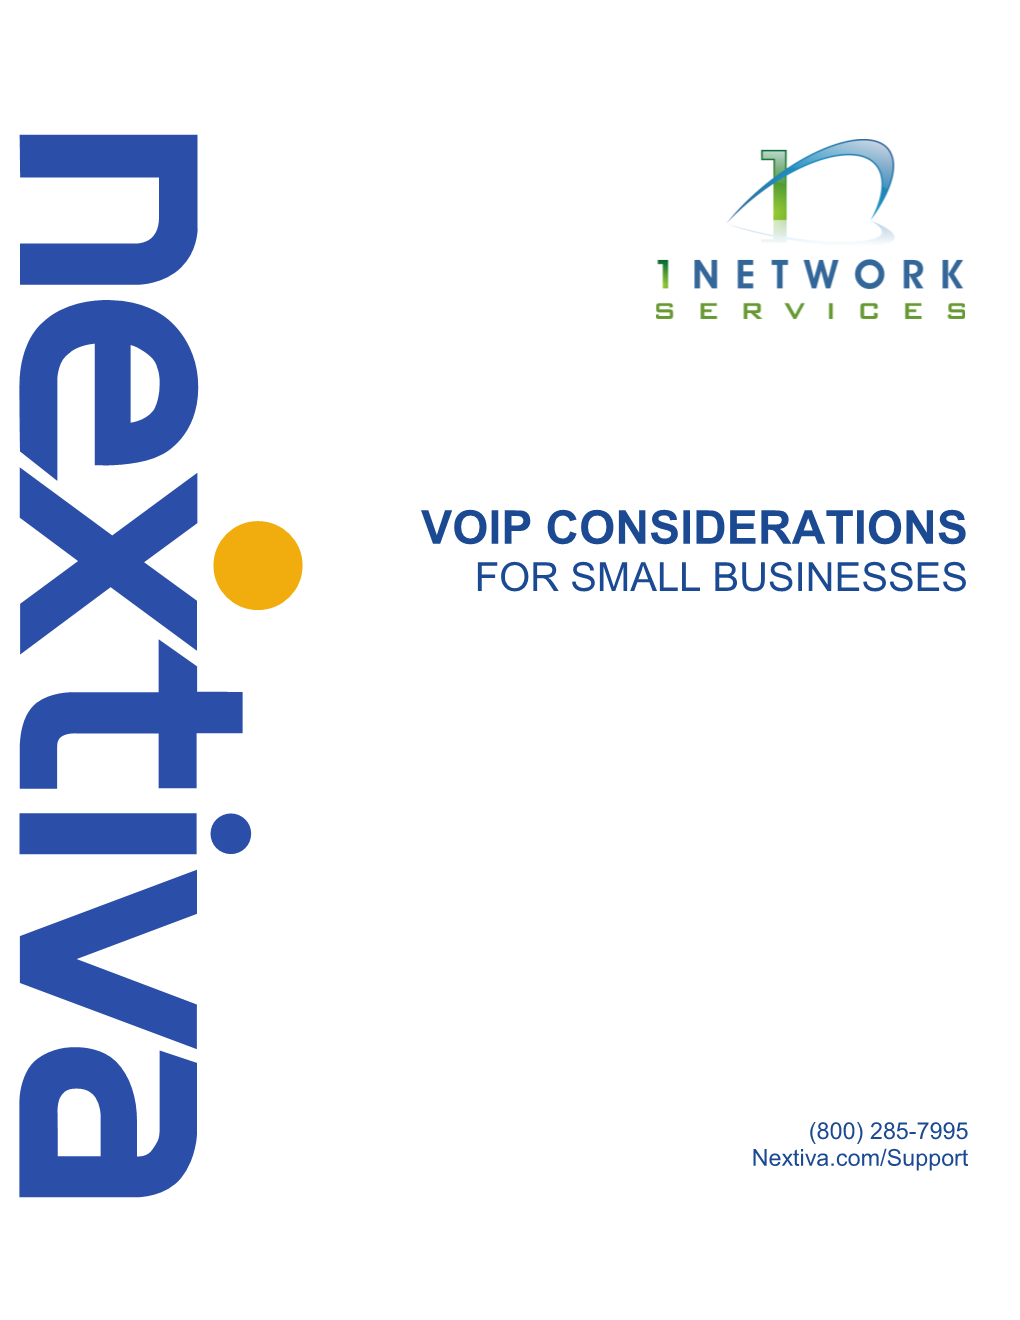 Voip Considerations for Small Businesses